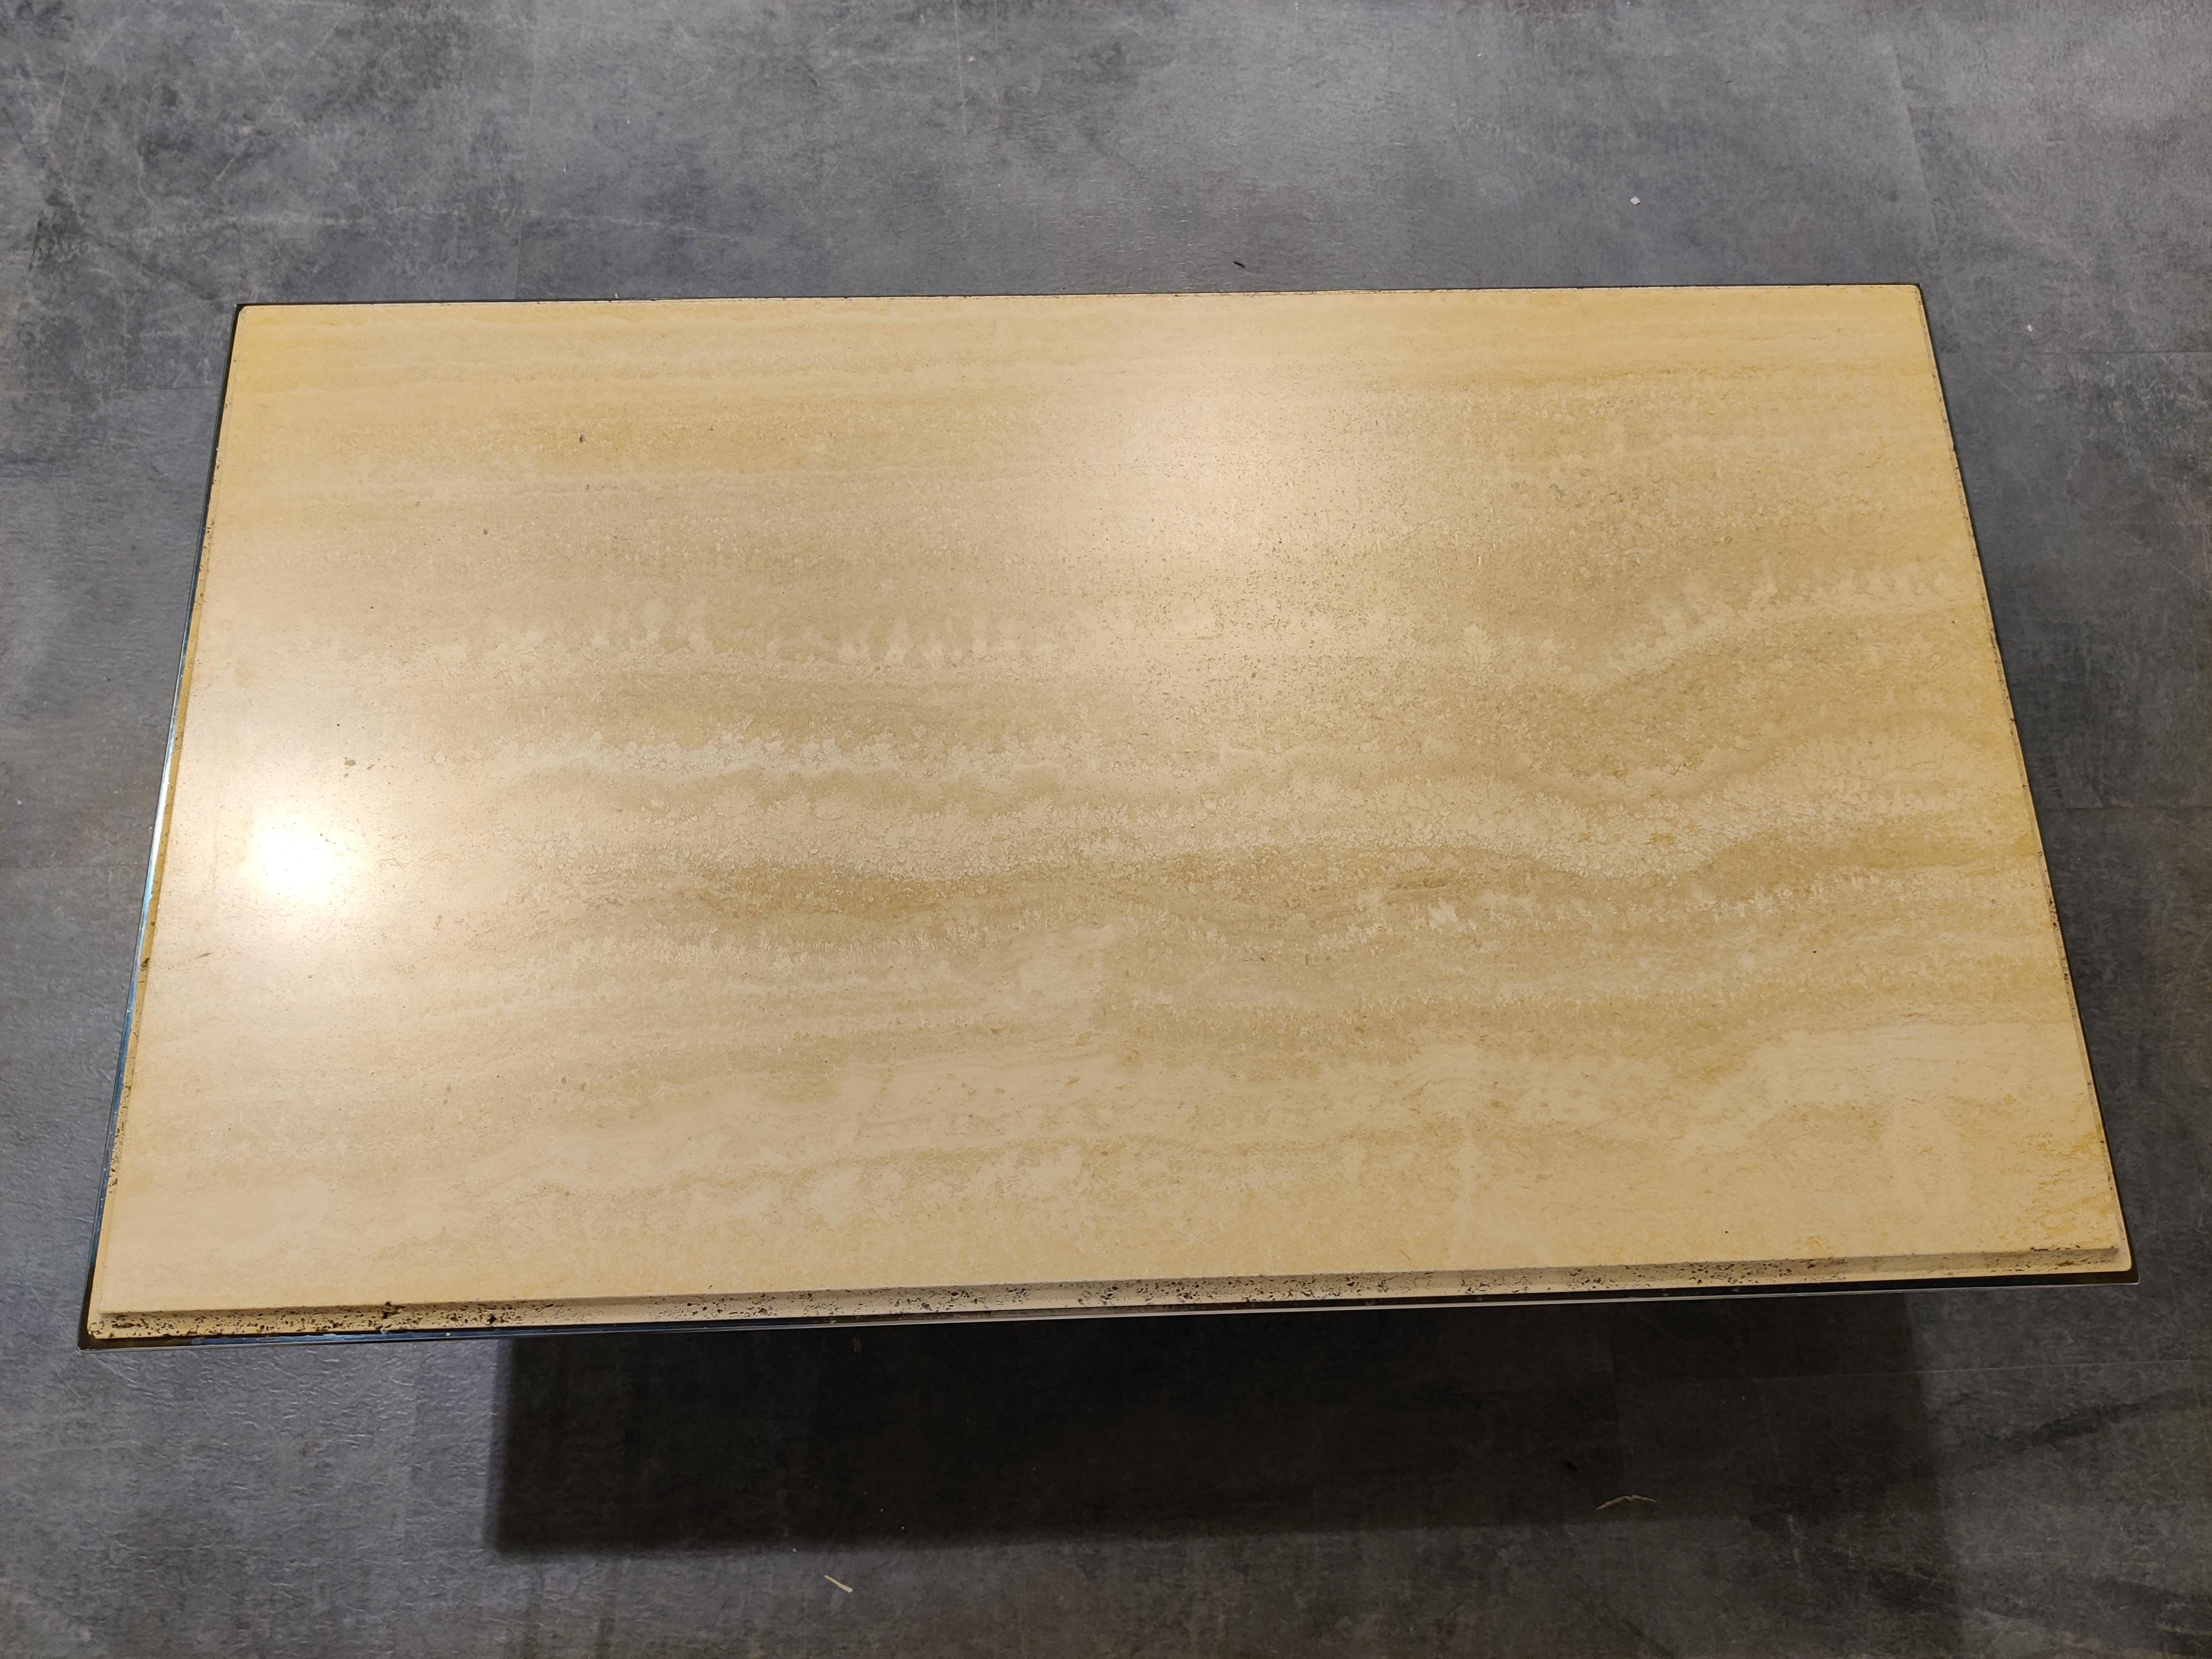 Rectangular travertine coffee table with a brass edge by Fedam

Natural travertine stone colour blends in perfectly with most interiors.

Good condition.

1970s - Belgium

Dimensions
Height: 38cm/14.96